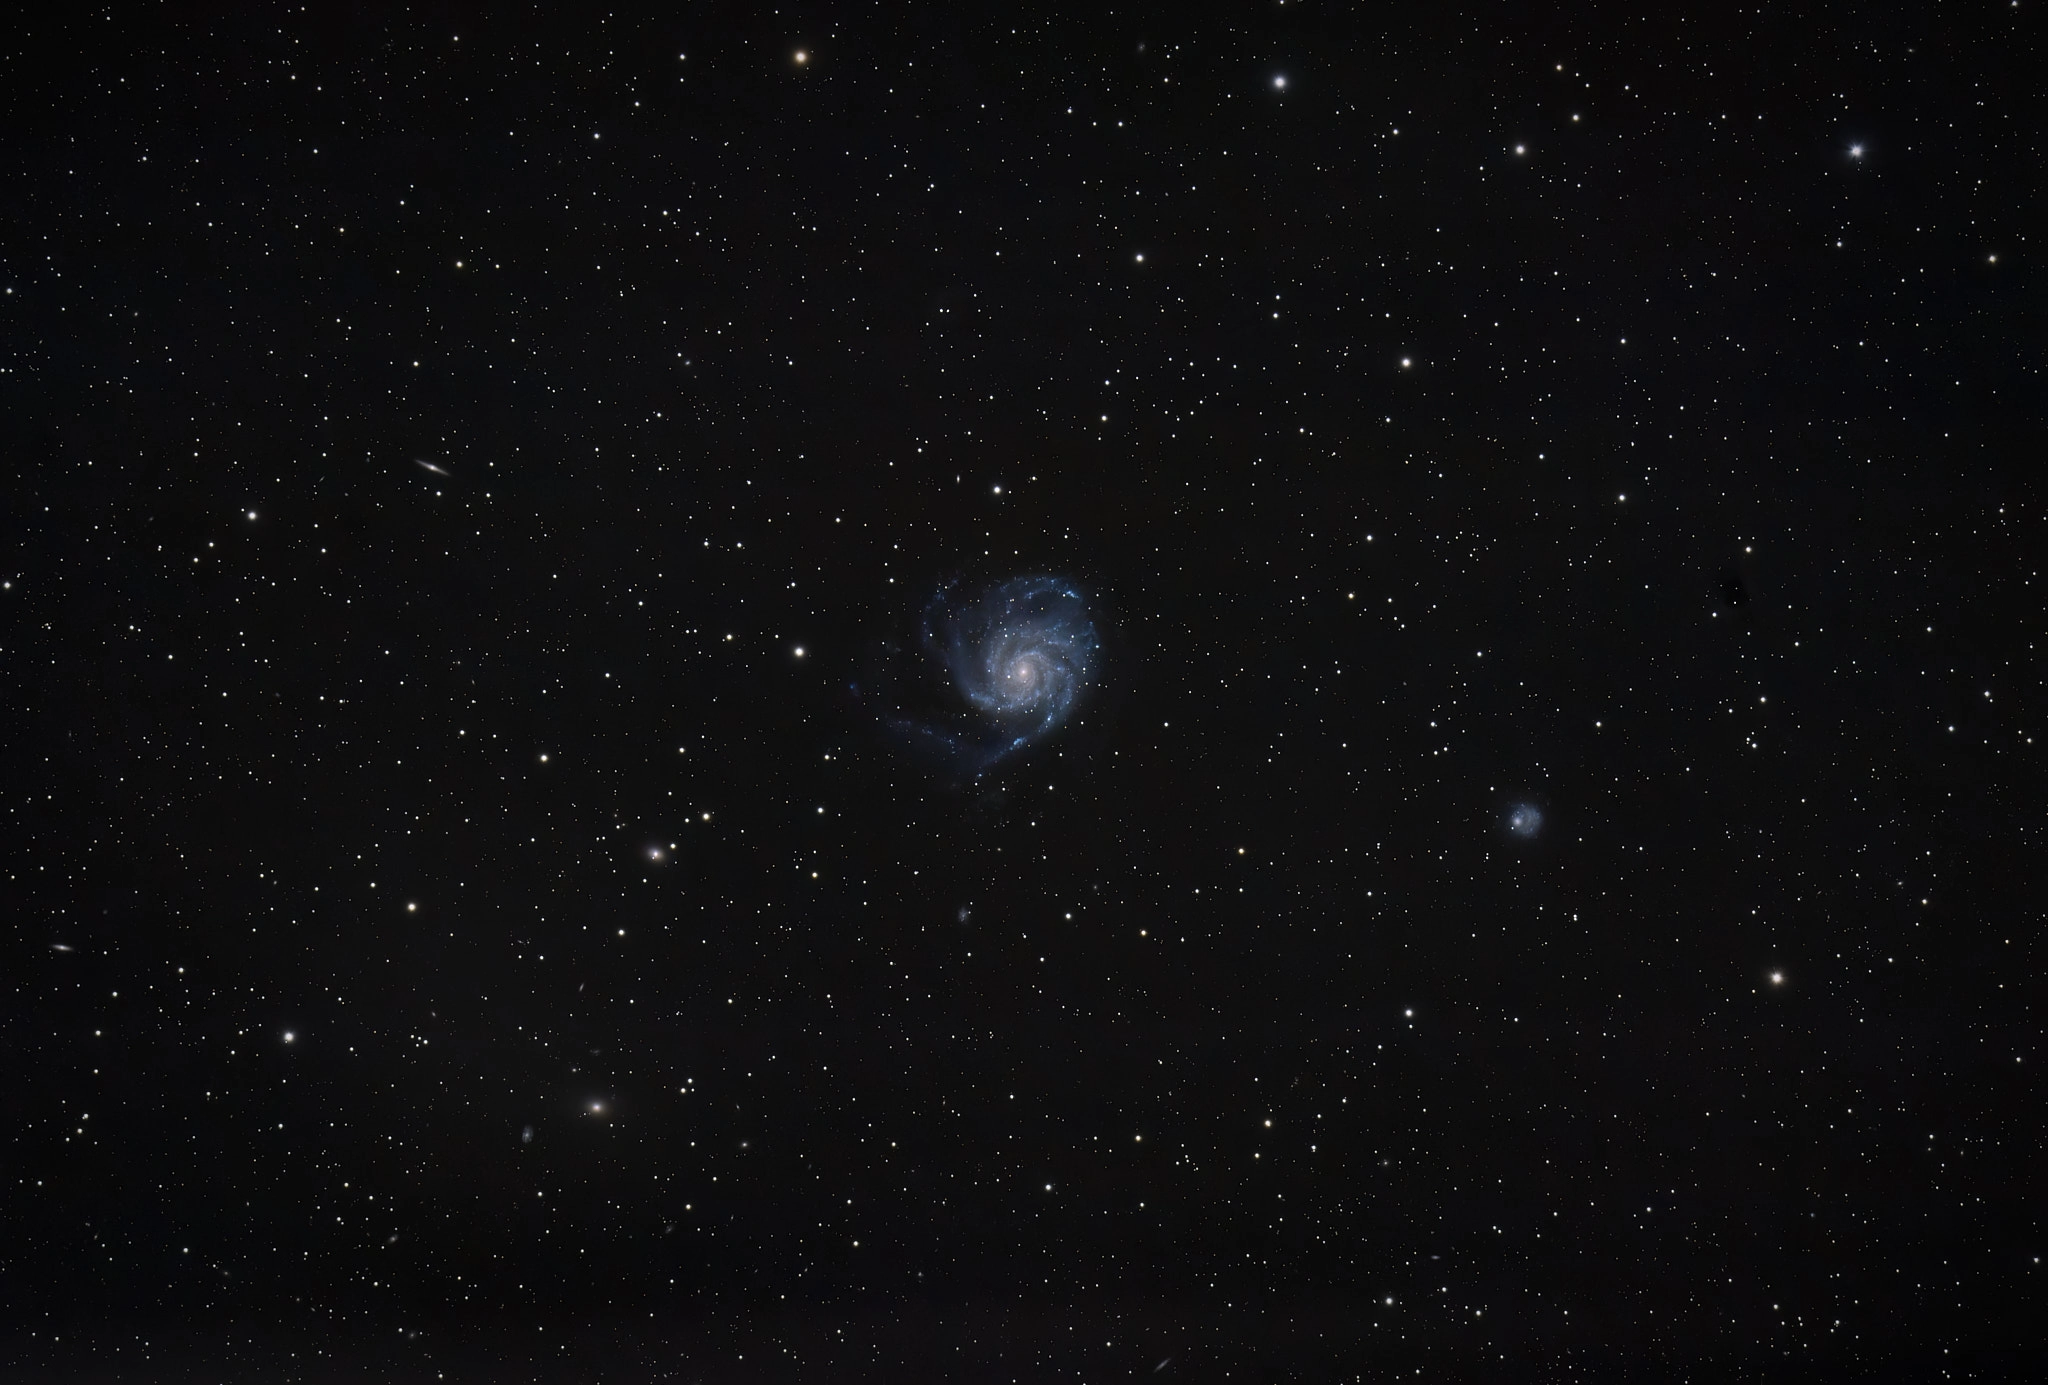 A spiral galaxy in the center of the frame